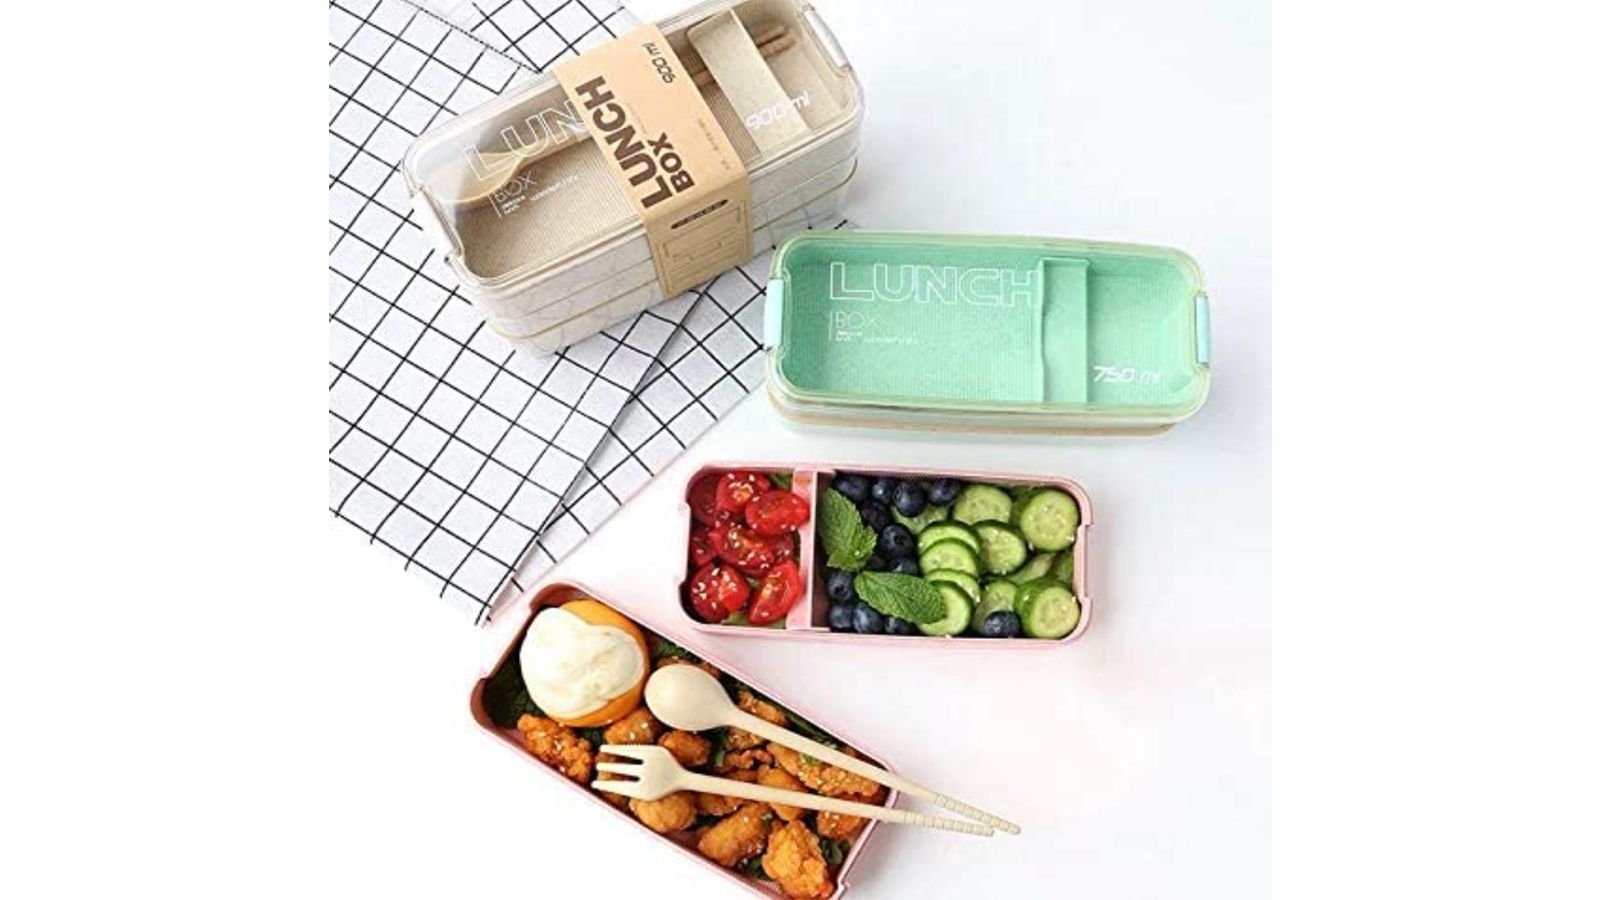 15 Best Lunch Boxes and Bags for Work